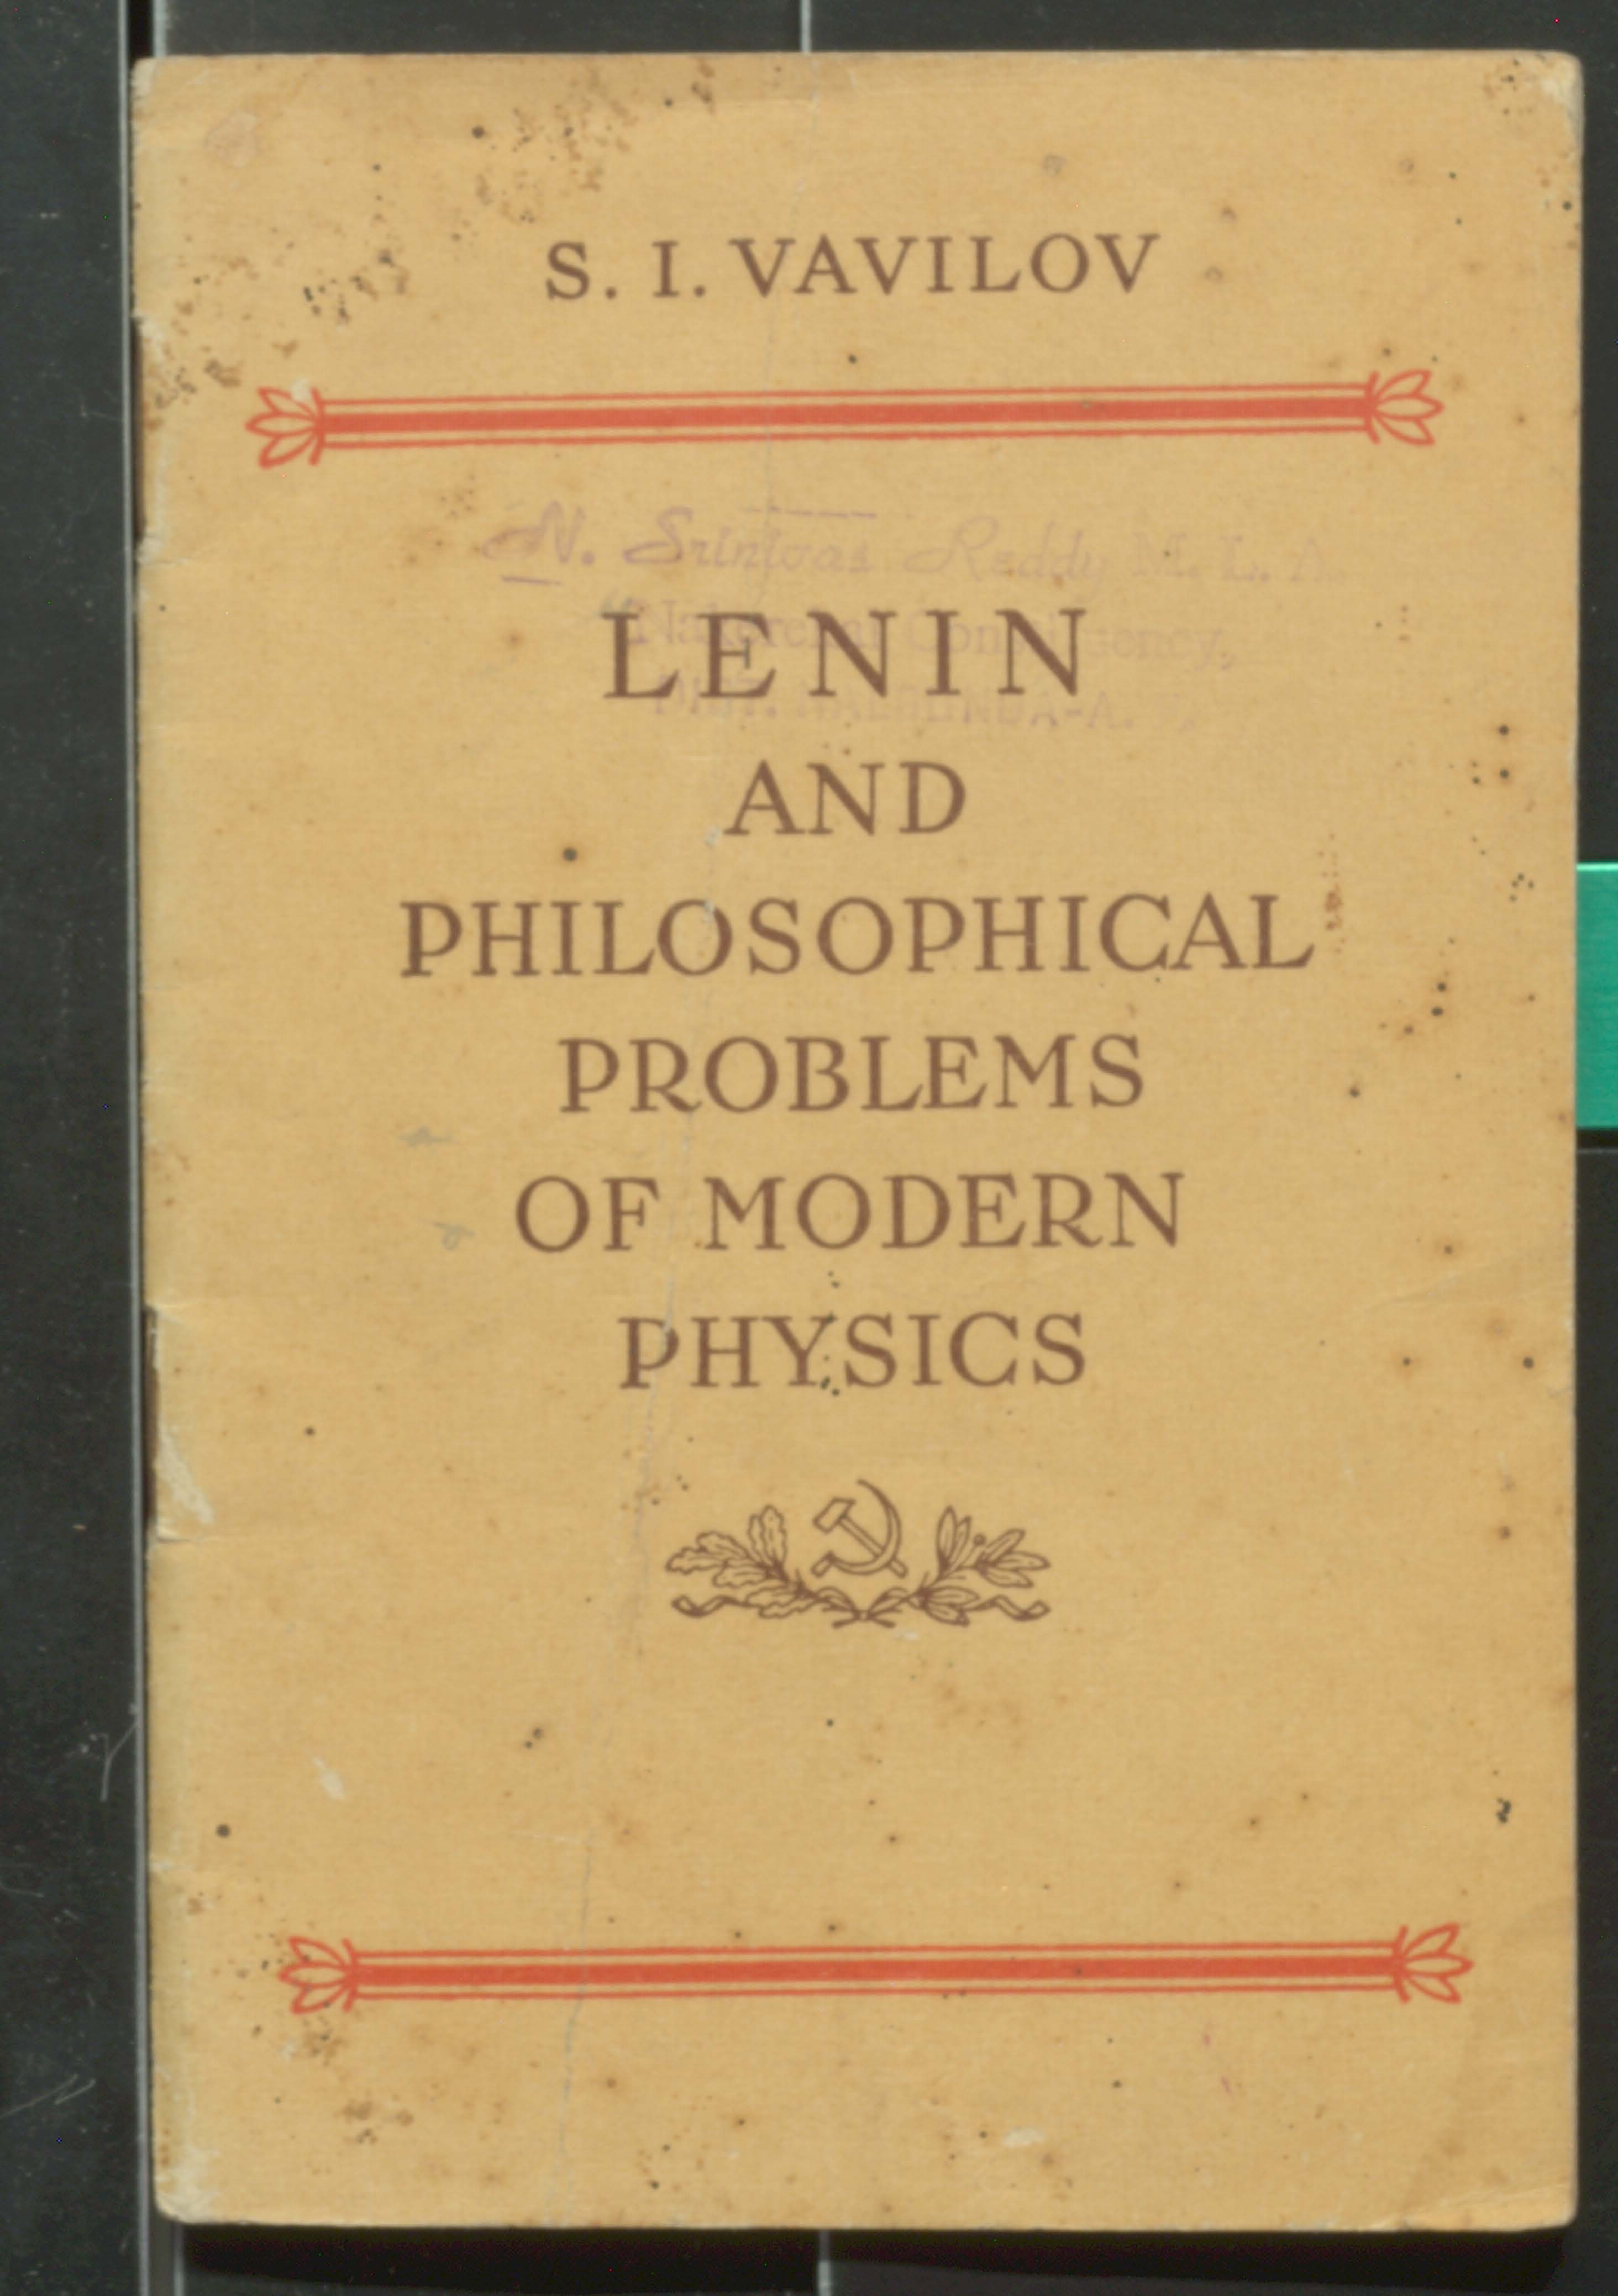 Lenin and philosophical problems of modern physics